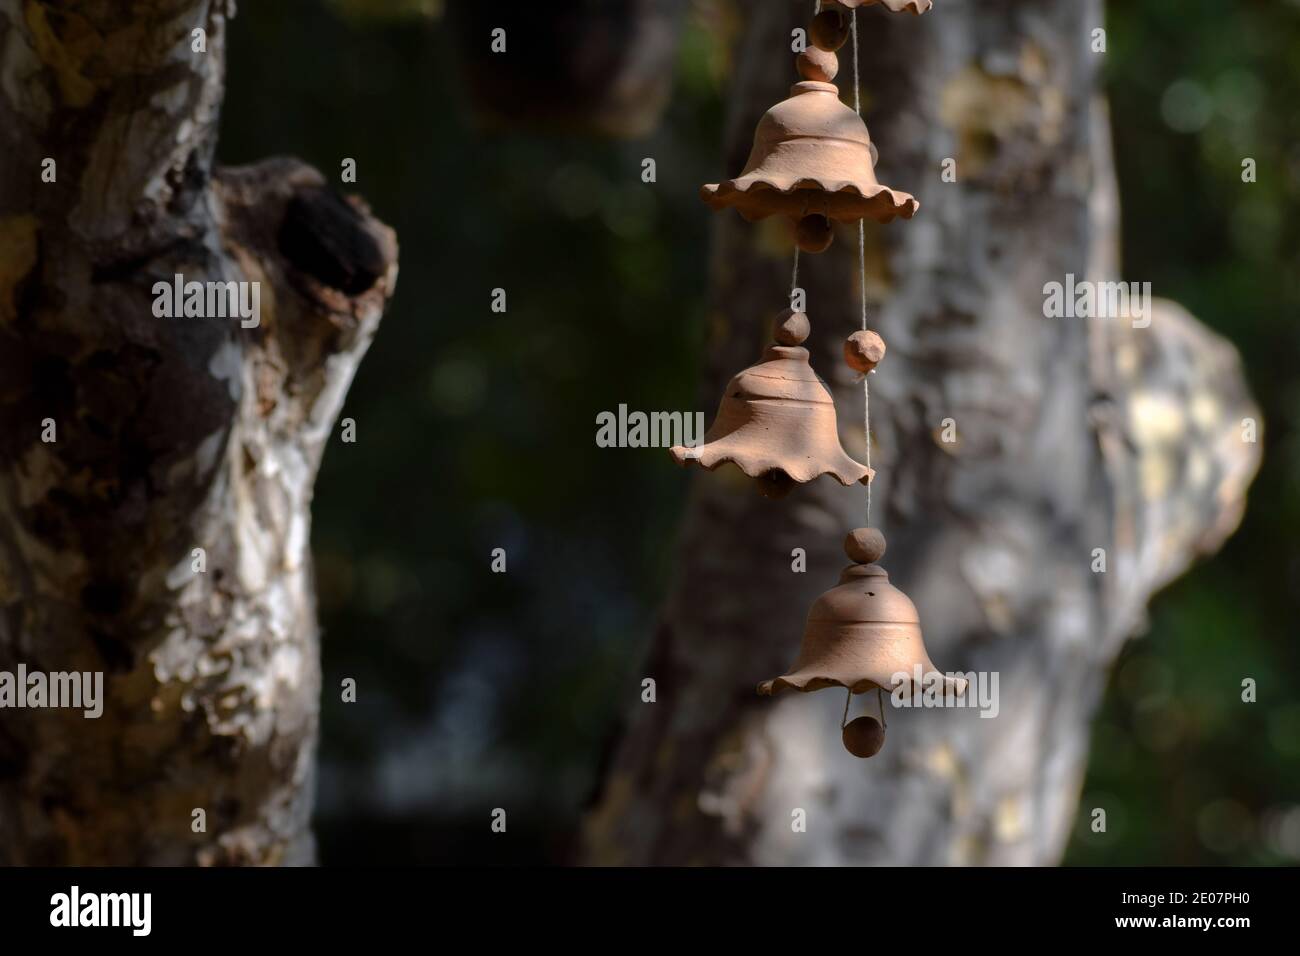 Beautiful terracotta Windchime bell hanging. Blurred background. Traditional clay mud pottery hand made windchime close up made in India Stock Photo